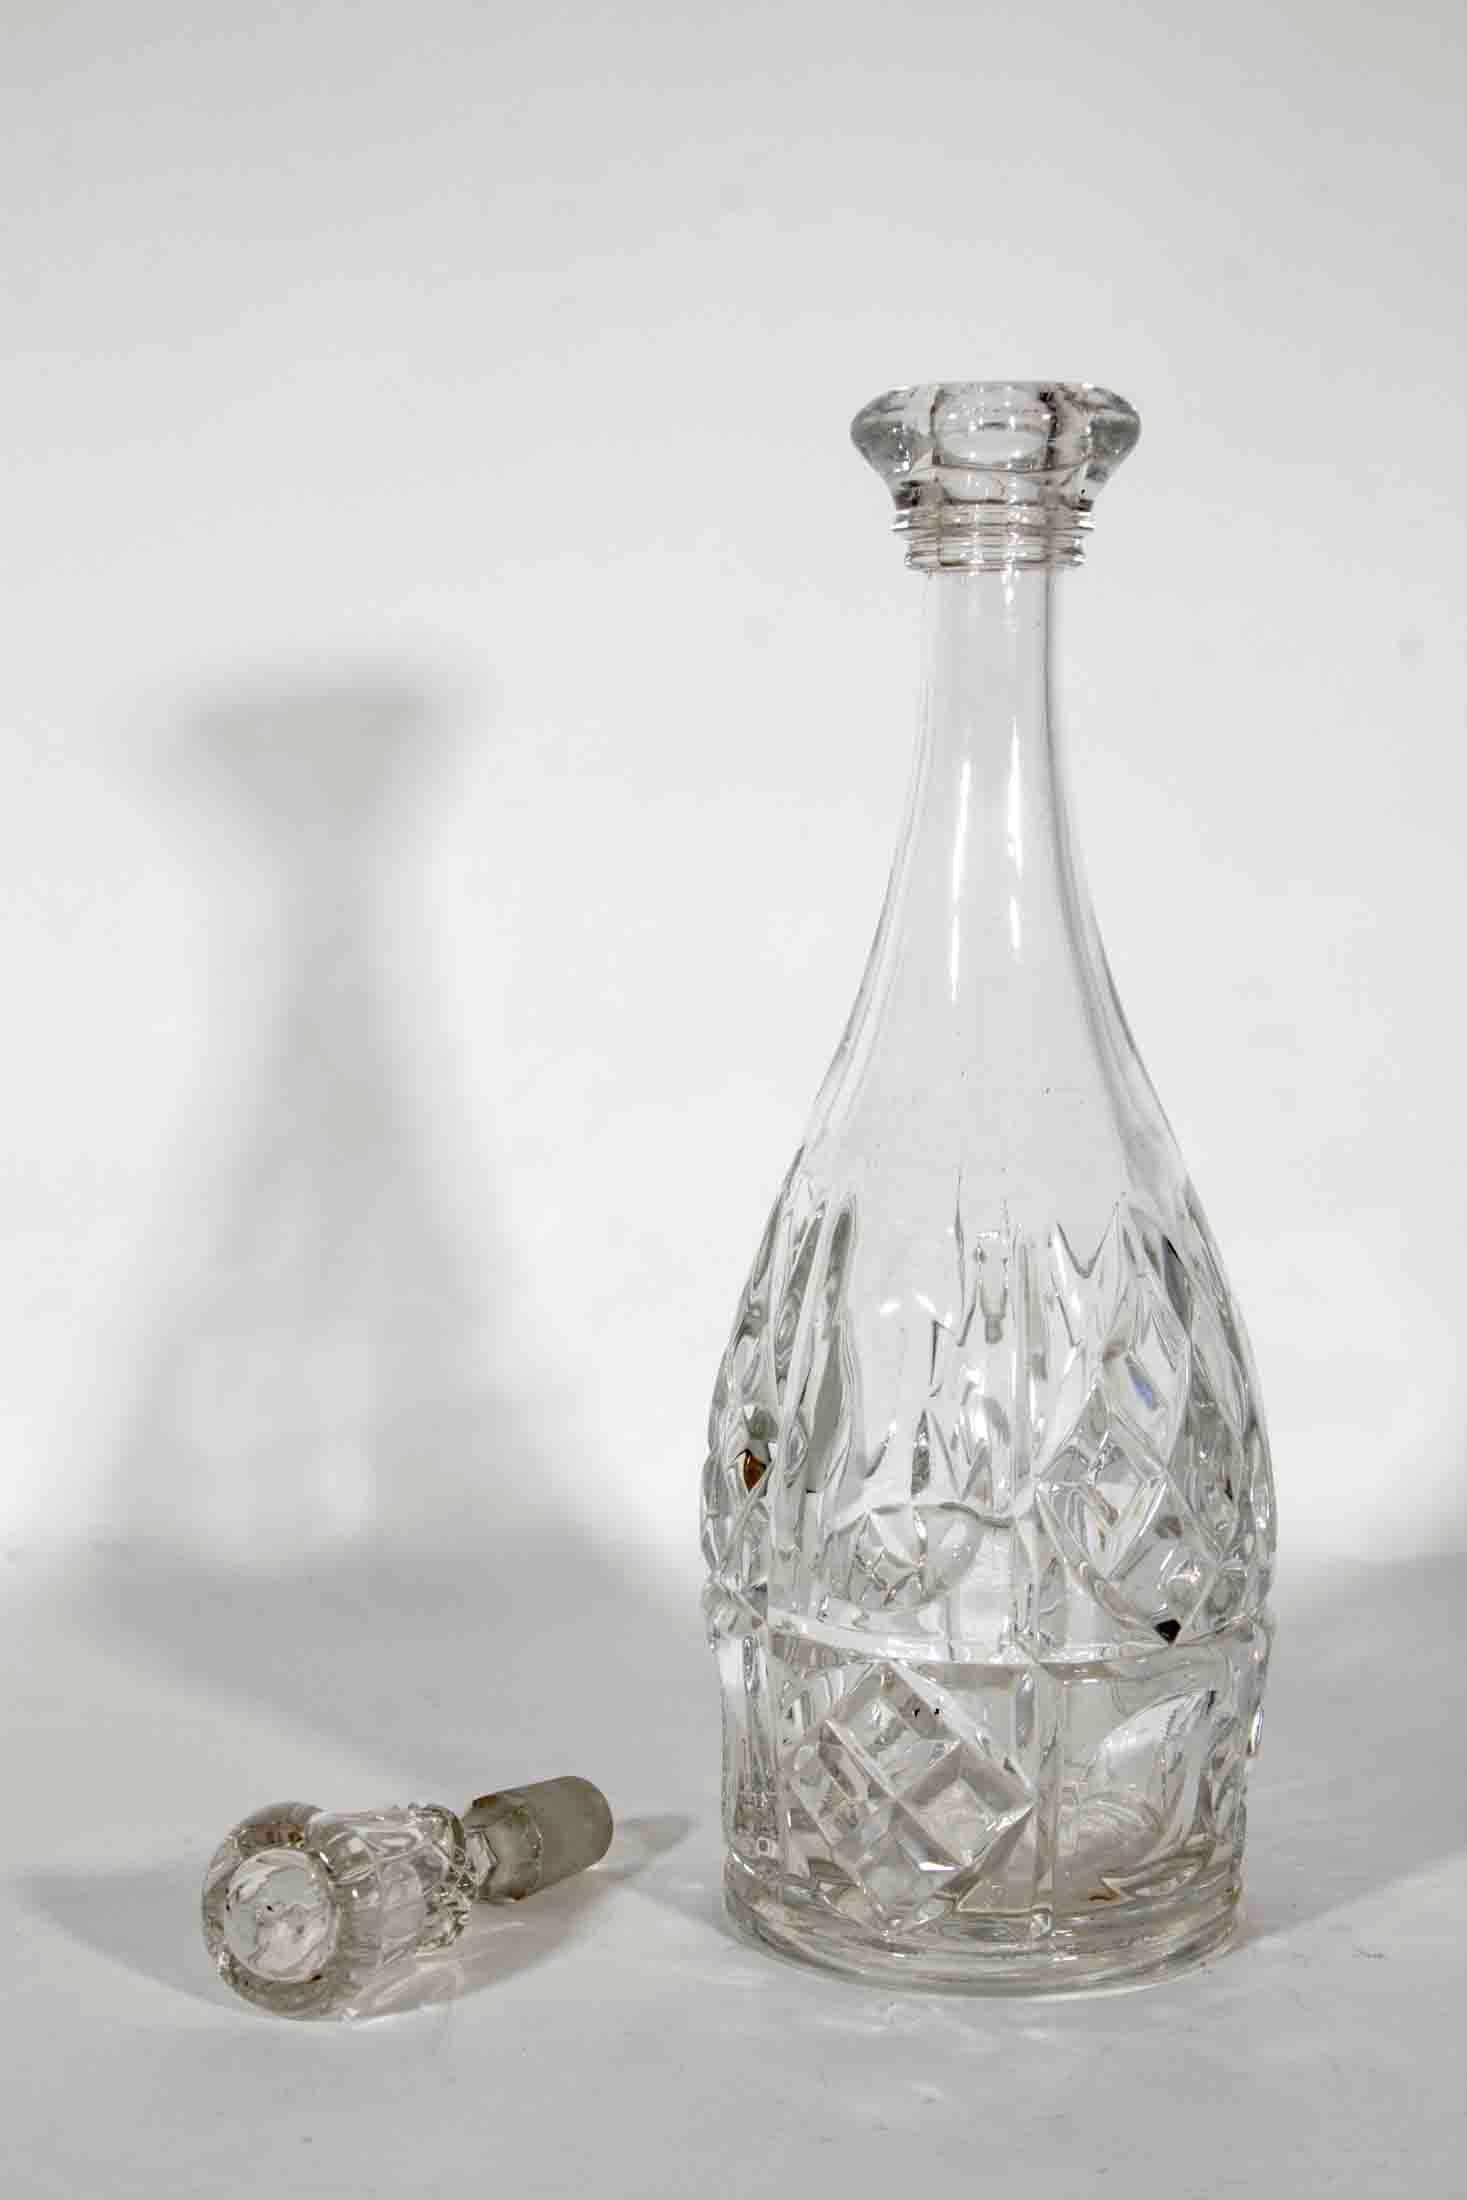 Antique clear cut crystal decanter. Excellent condition. The decanter measure 14 inches high x 4 inches diameter.